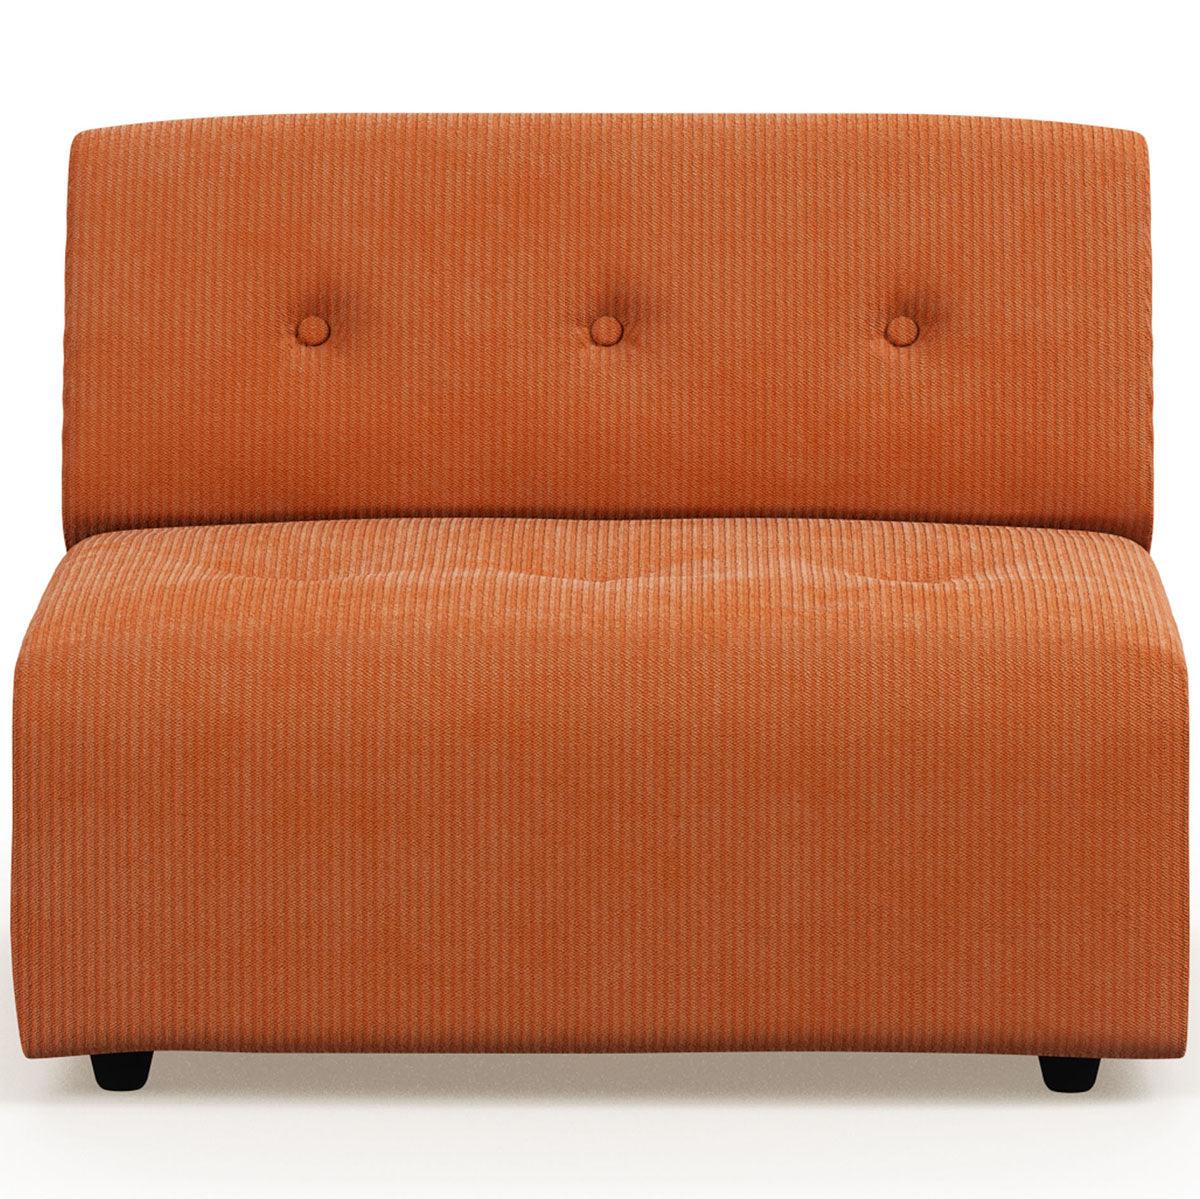 Vint Corduroy Rib Couch - Element Middle - WOO .Design